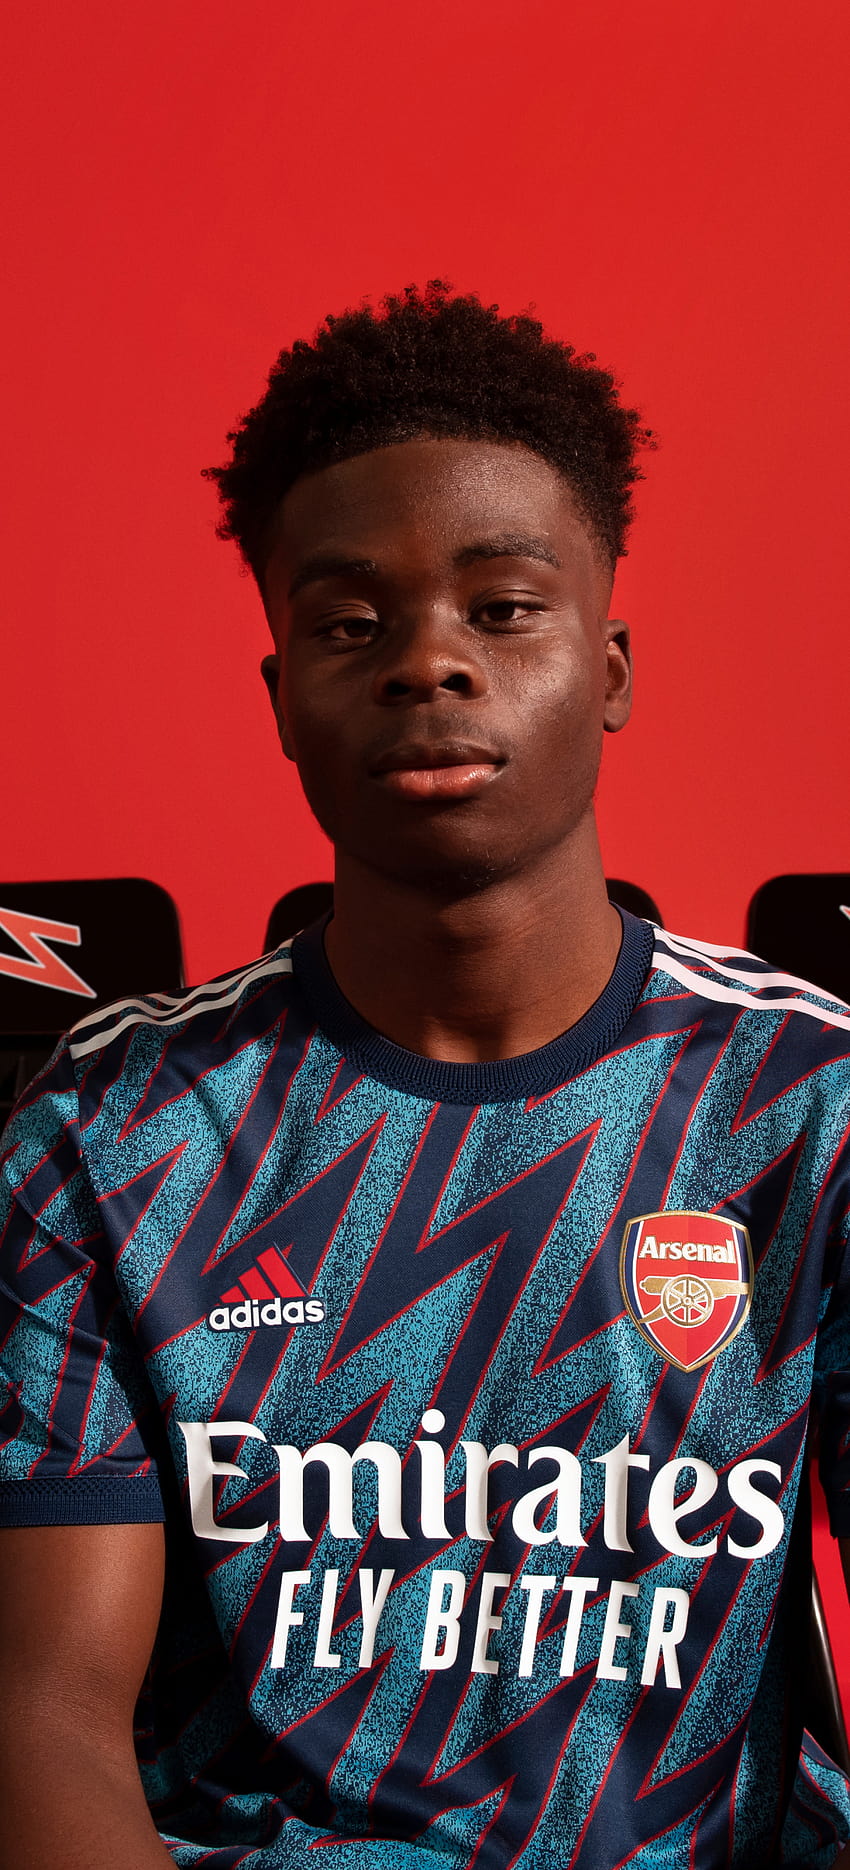 1440x3168 Arsenal F.c., Bukayo Saka, Football, Soccer, Red Backgrounds for OnePlus 8 Pro, Oppo Find X2 HD phone wallpaper